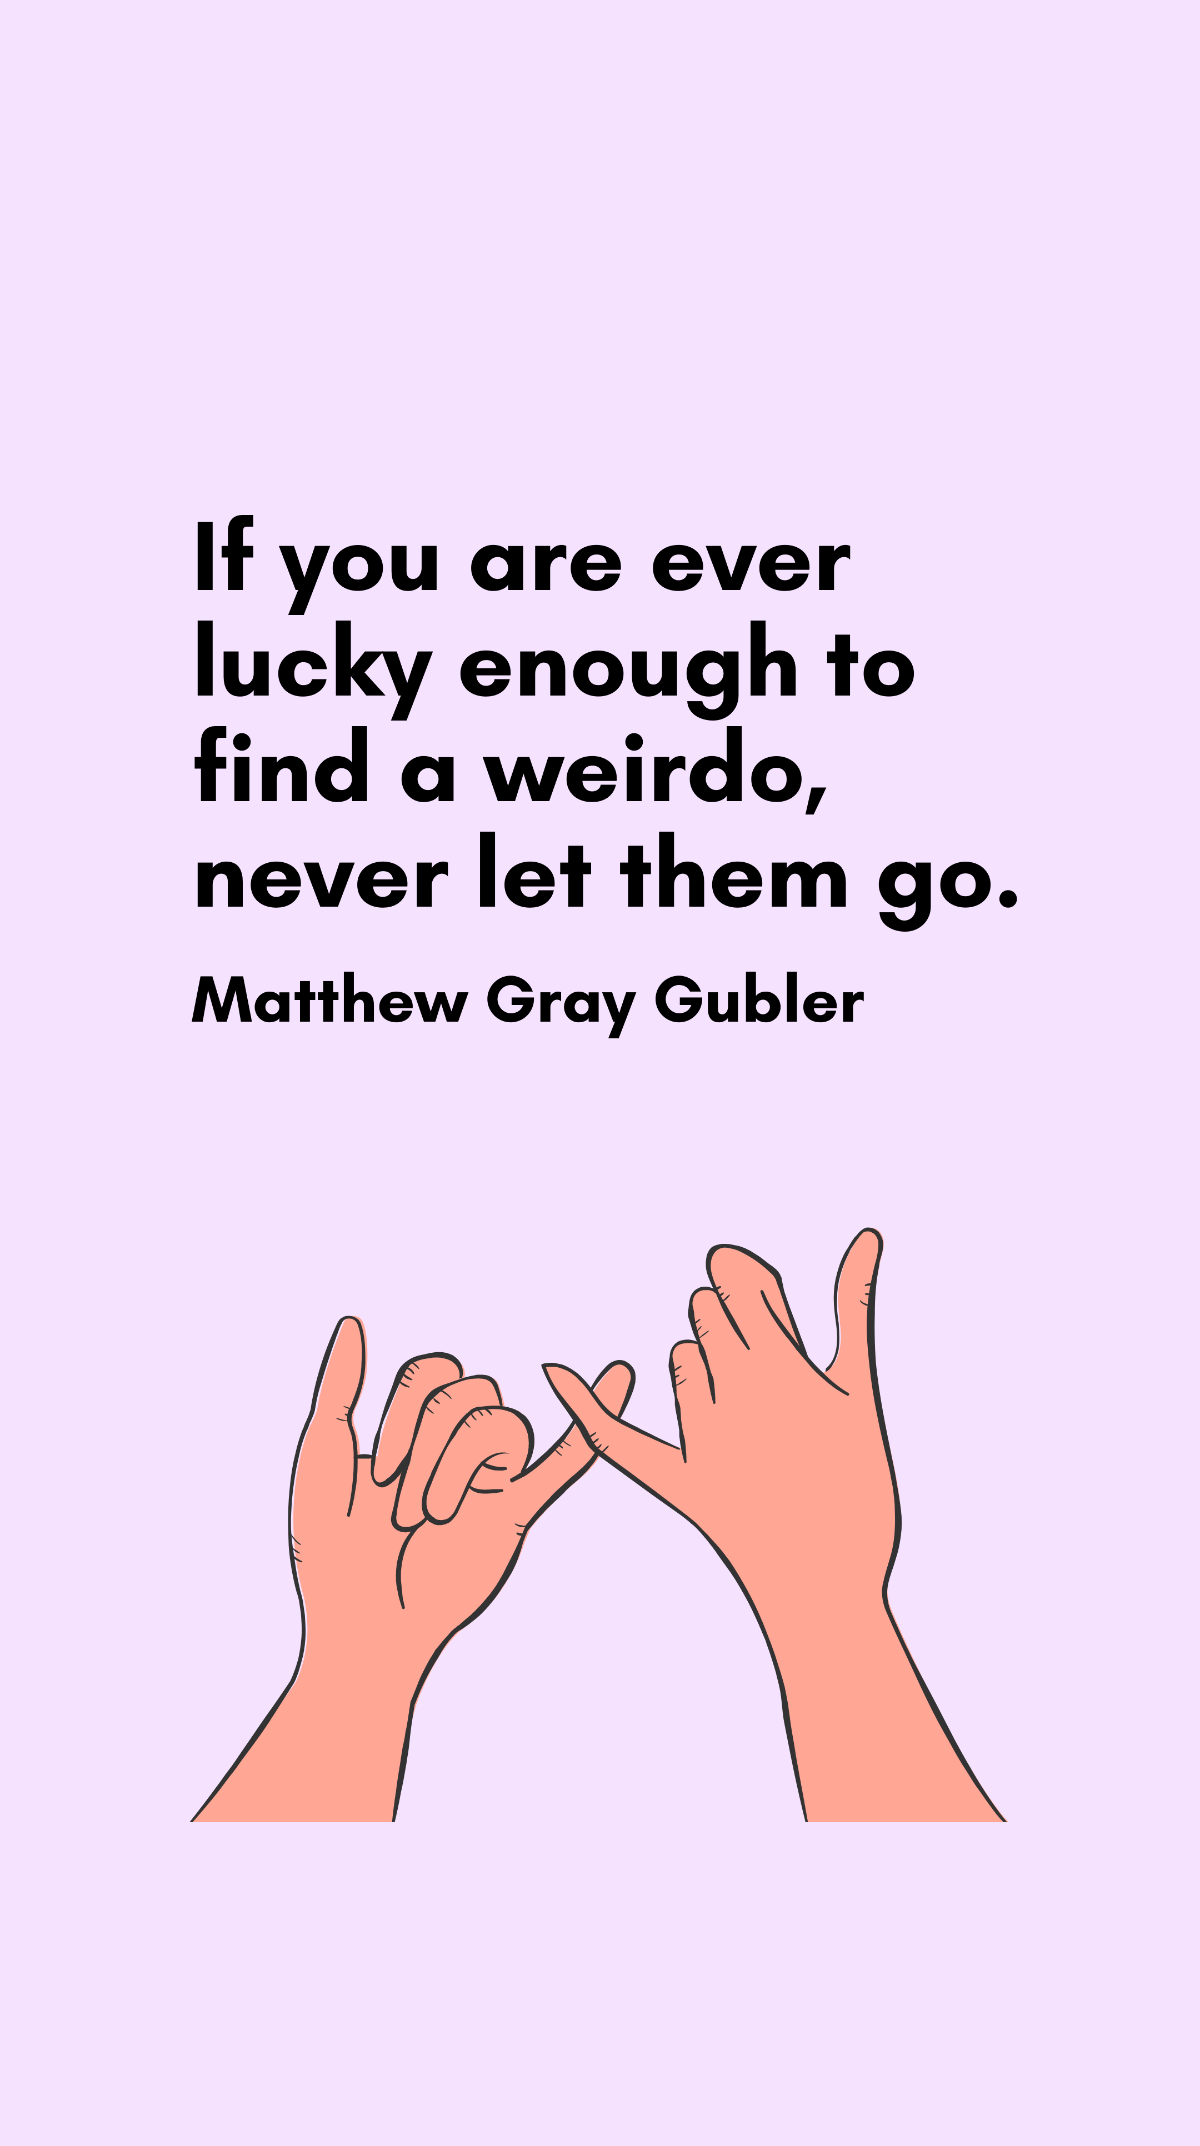 Matthew Gray Gubler - If you are ever lucky enough to find a weirdo, never let them go. Template